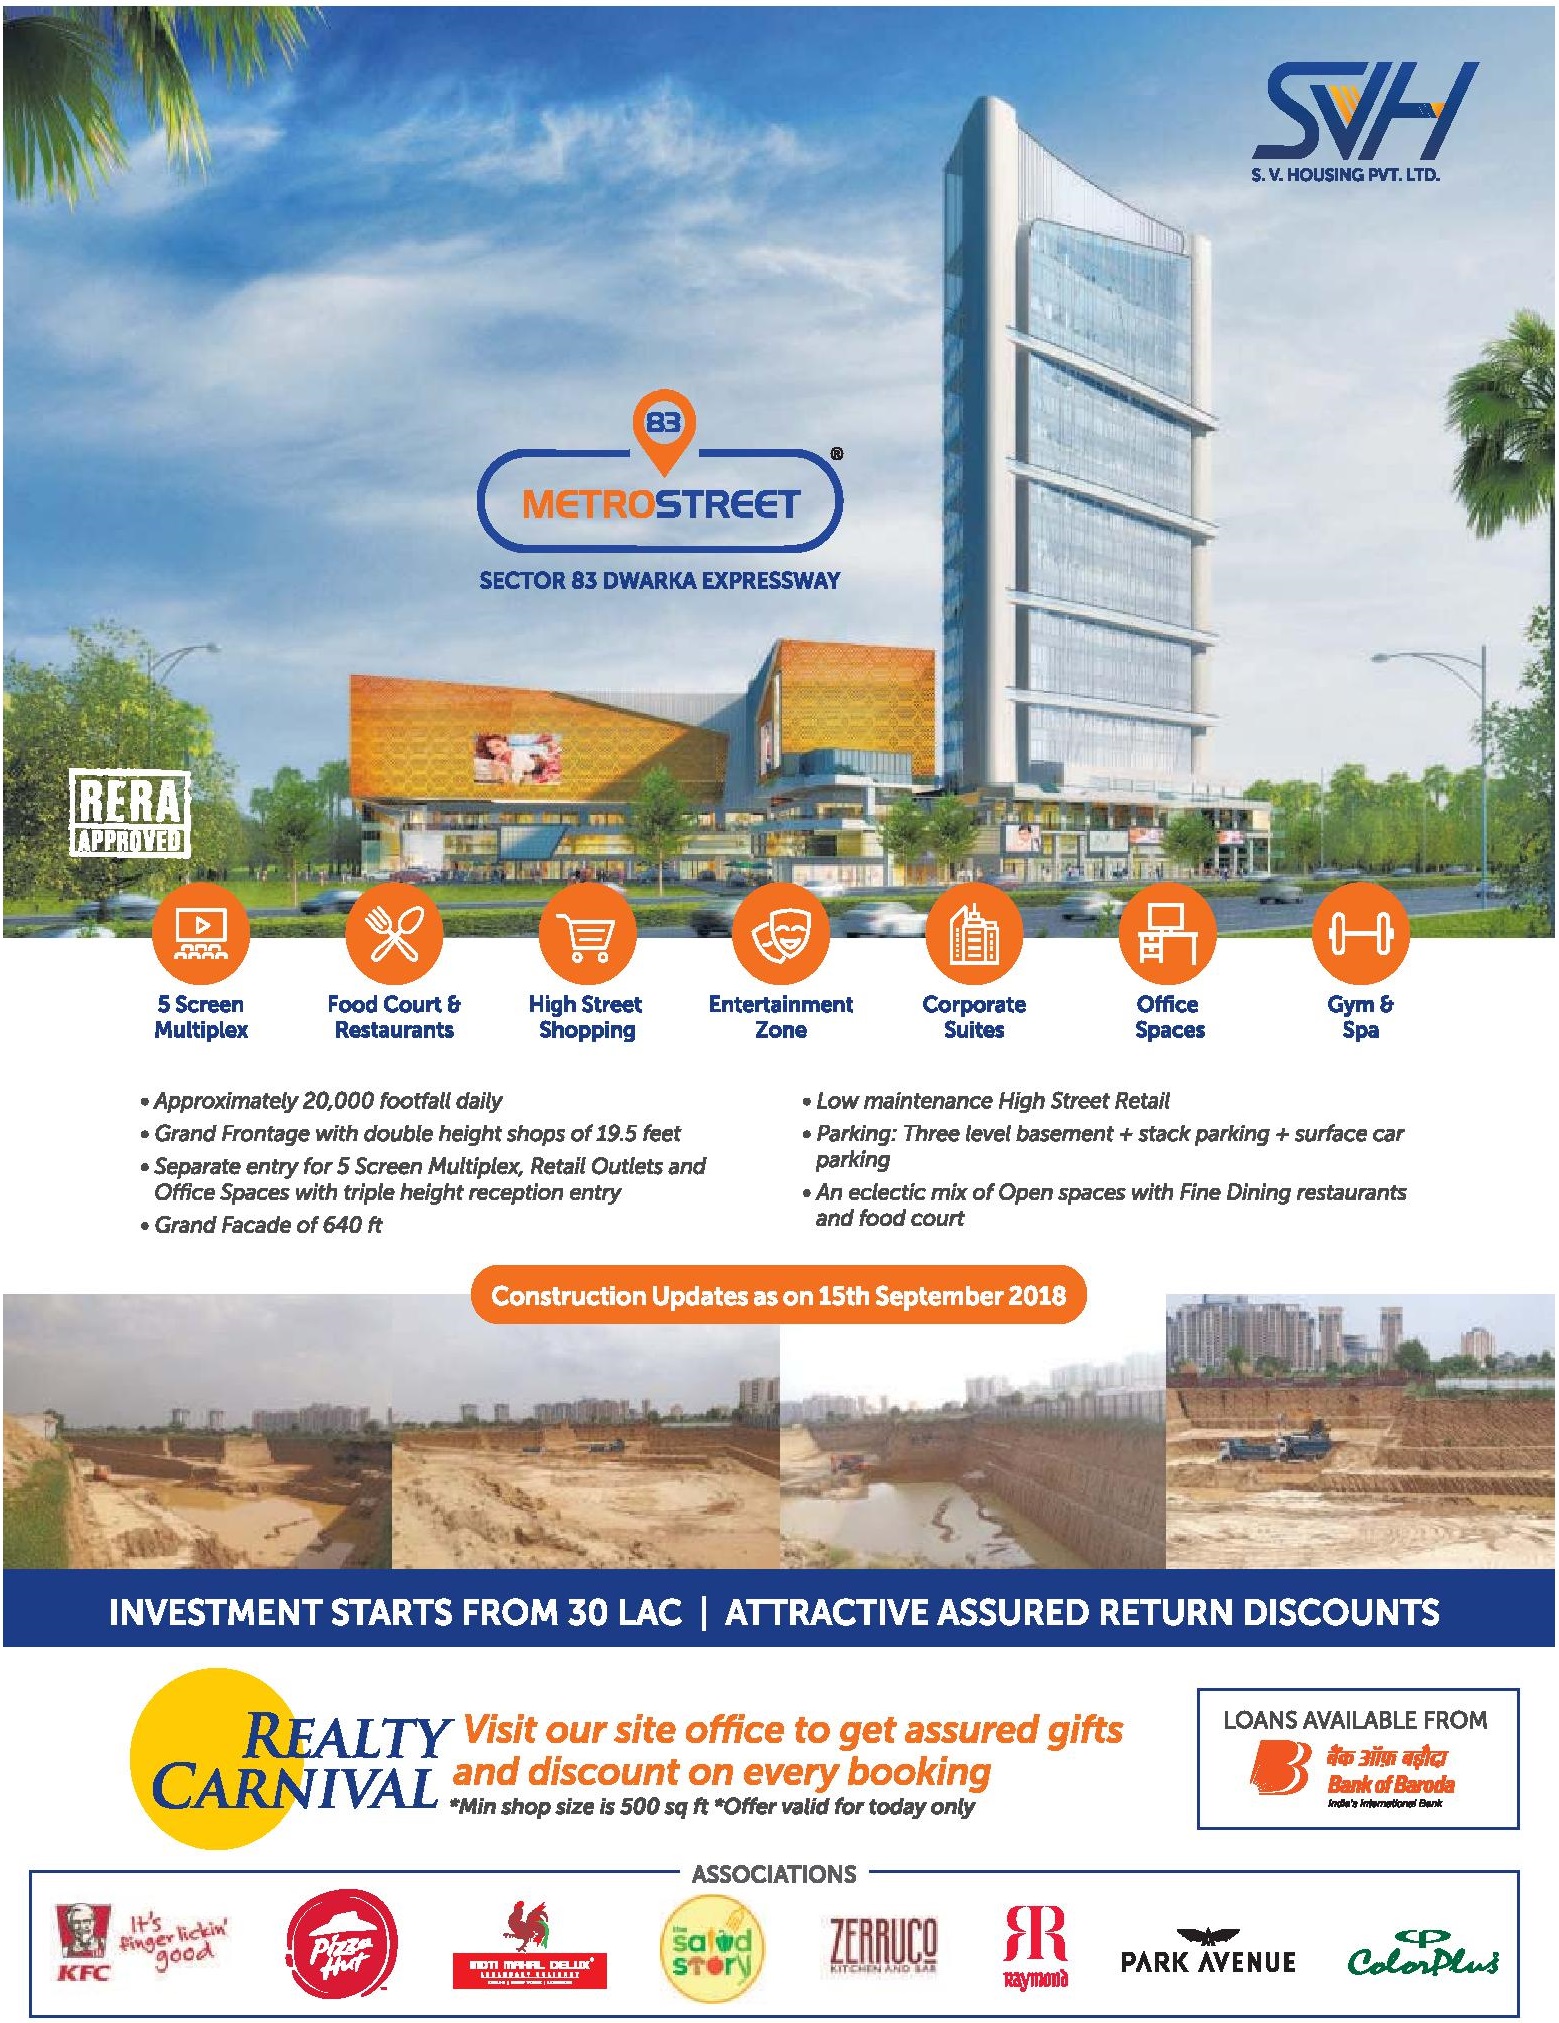 Avail attractive assured return discount at SVH 83 Metro Street in Gurgaon Update